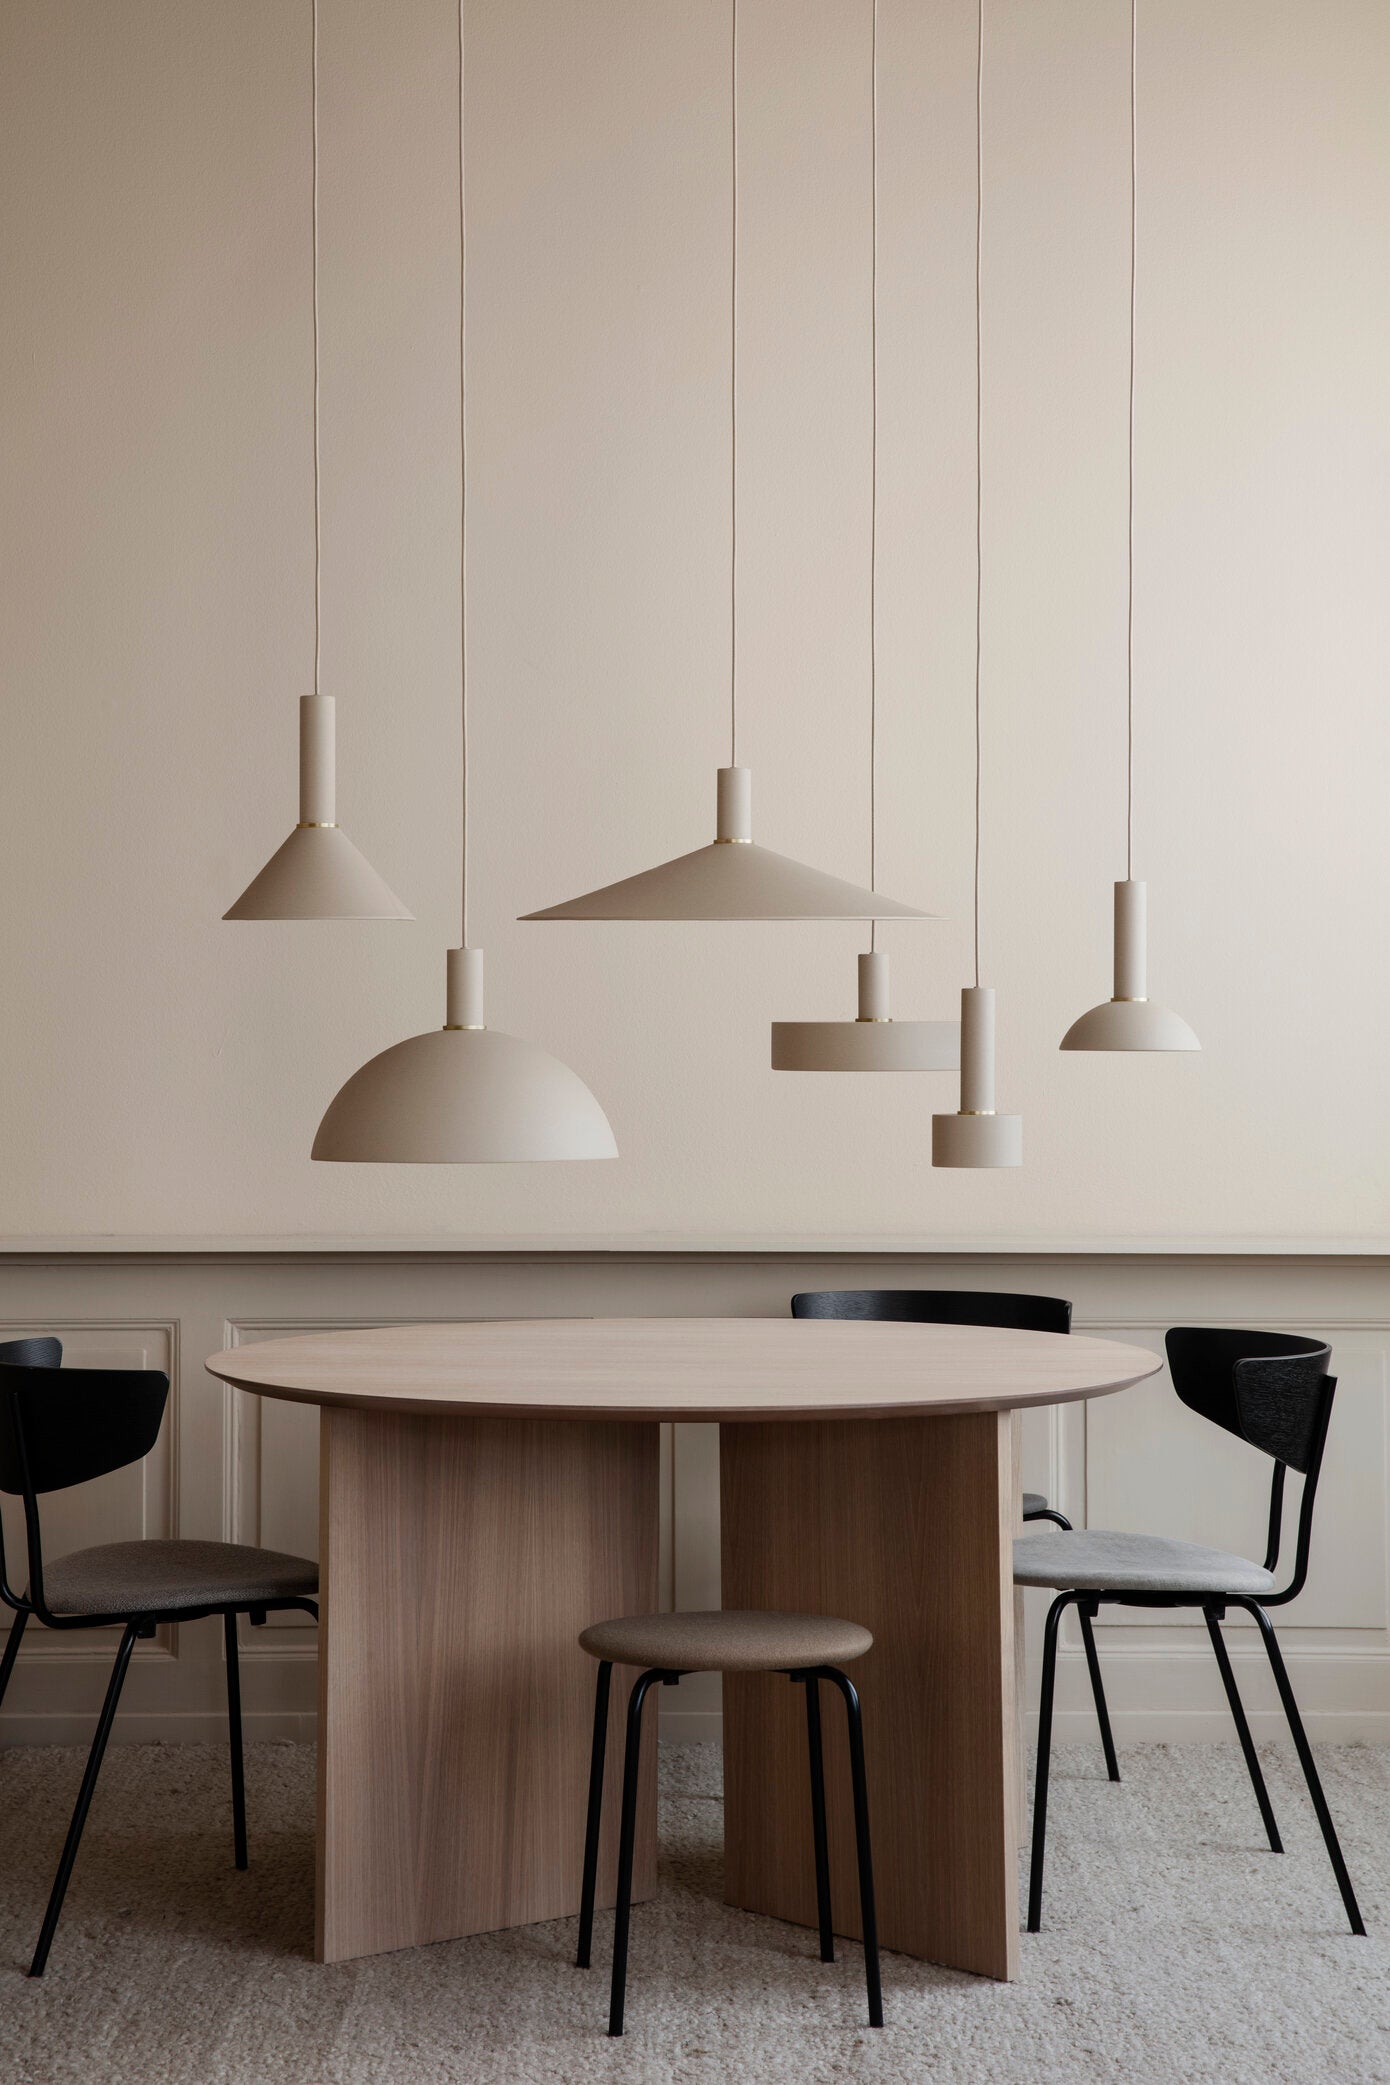 Collect Socket Pendant - Low by ferm LIVING